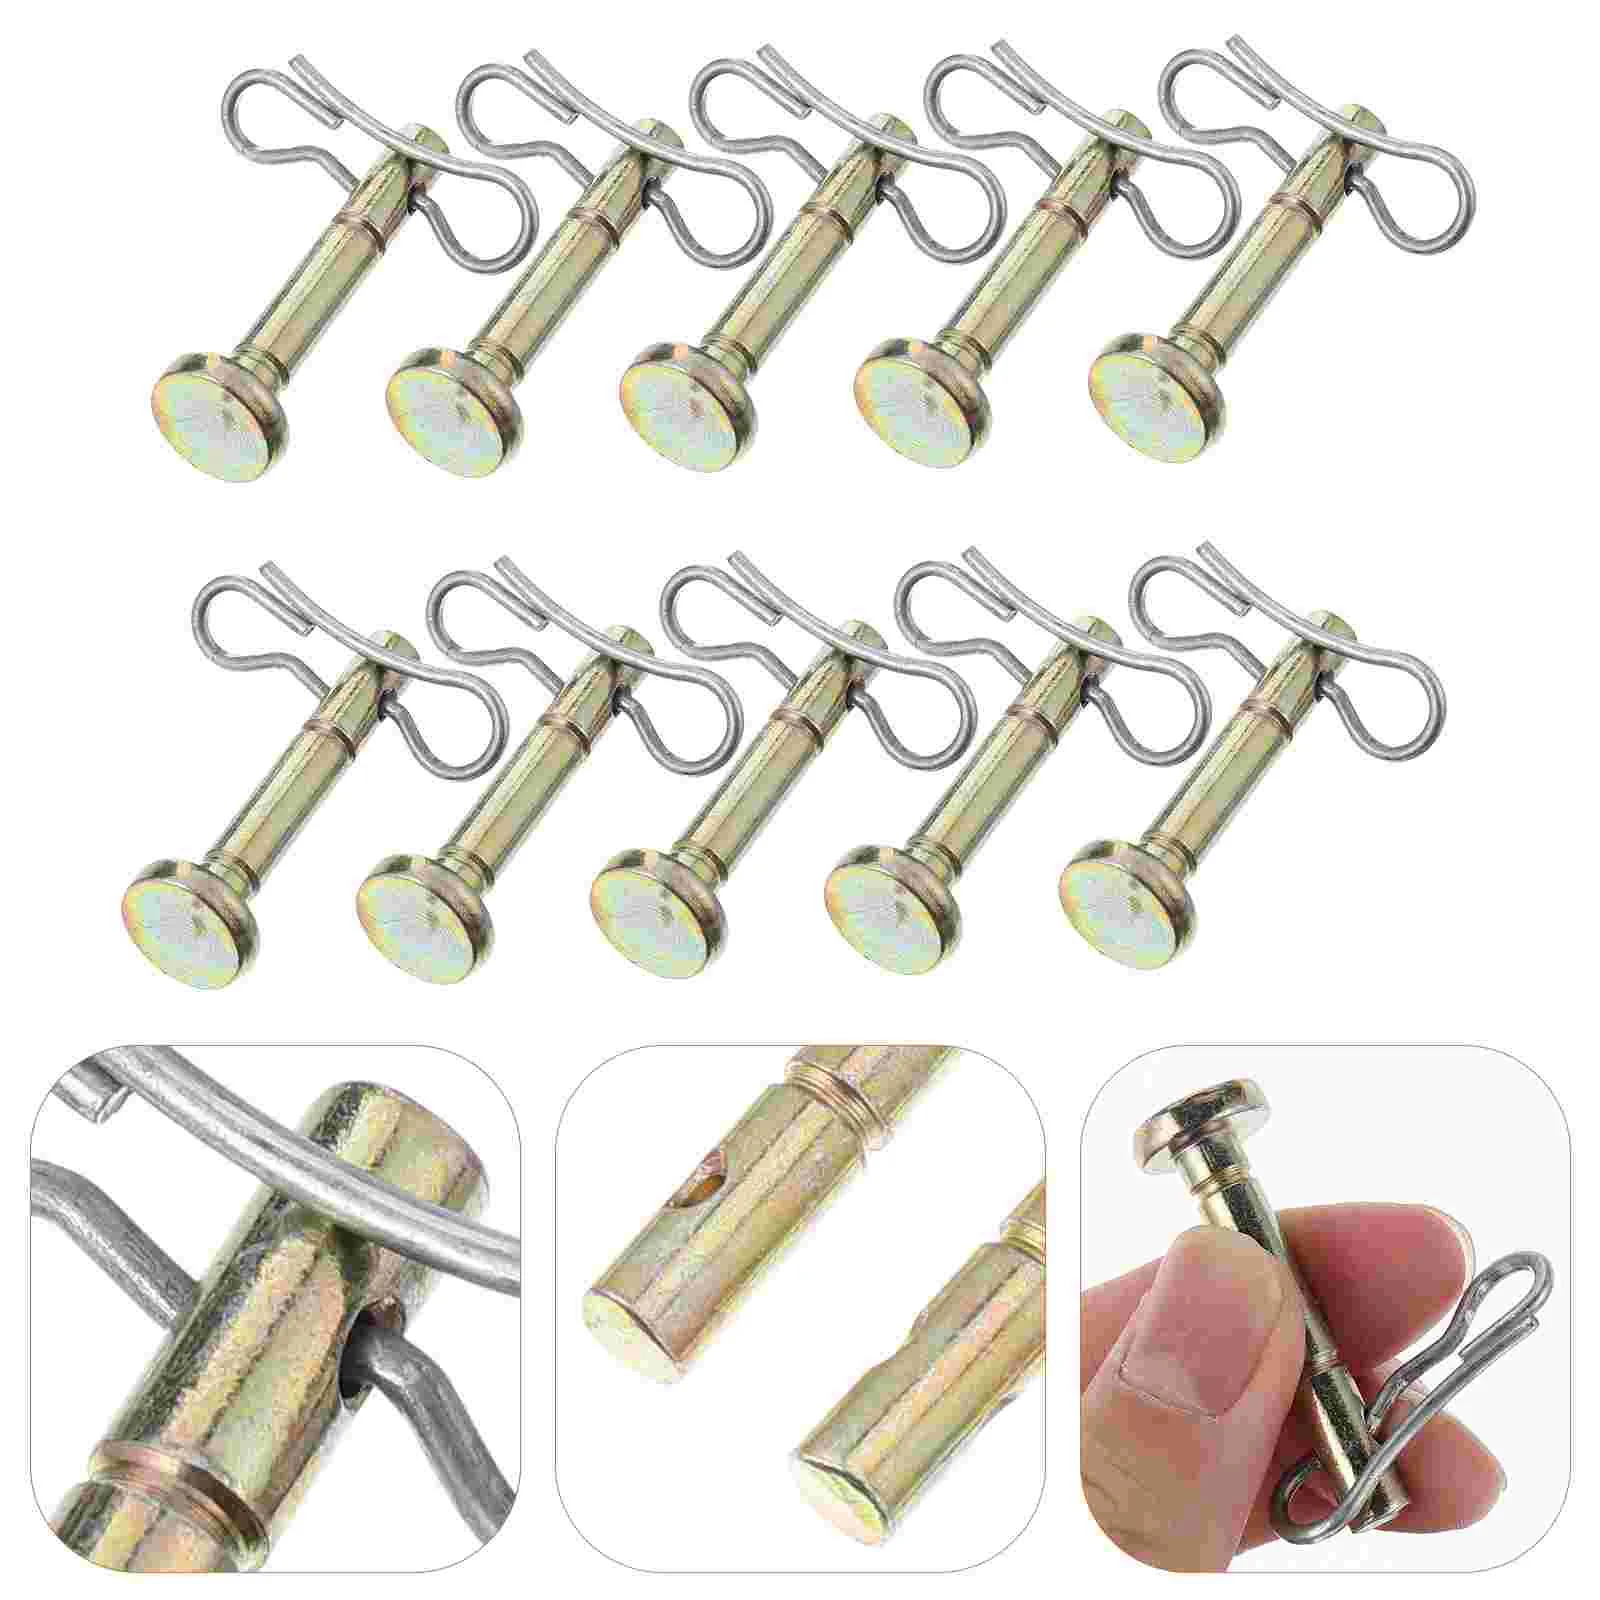 

Set/20PCS Metal Replacement Shear Pin Cotter Snow Thrower Snowblower Part Accessory